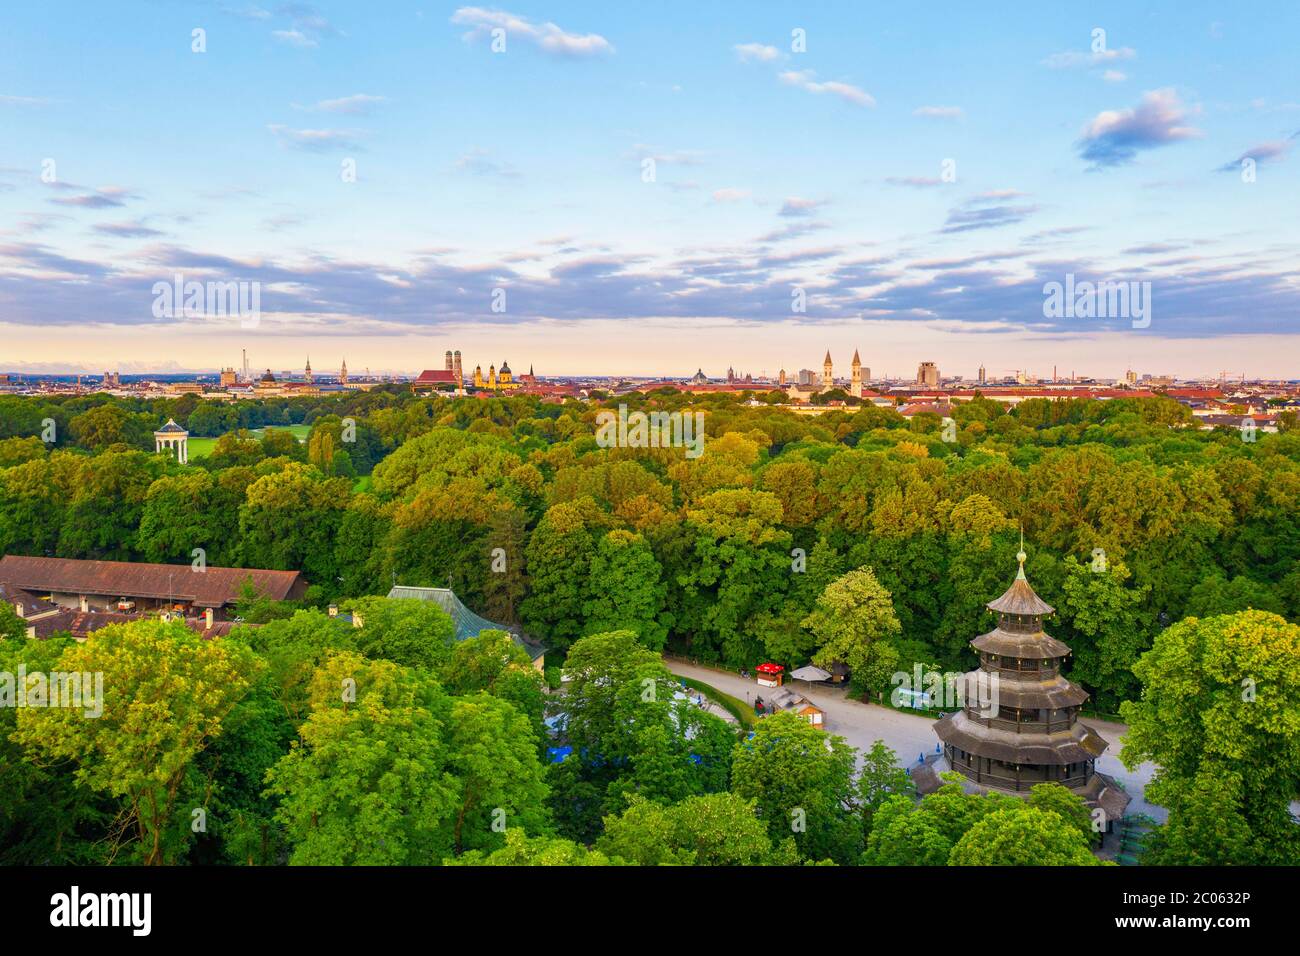 Chinese tower, English garden, view over the old town and Maxvorstadt in the morning light, Munich, aerial view, Upper Bavaria, Bavaria, Germany Stock Photo